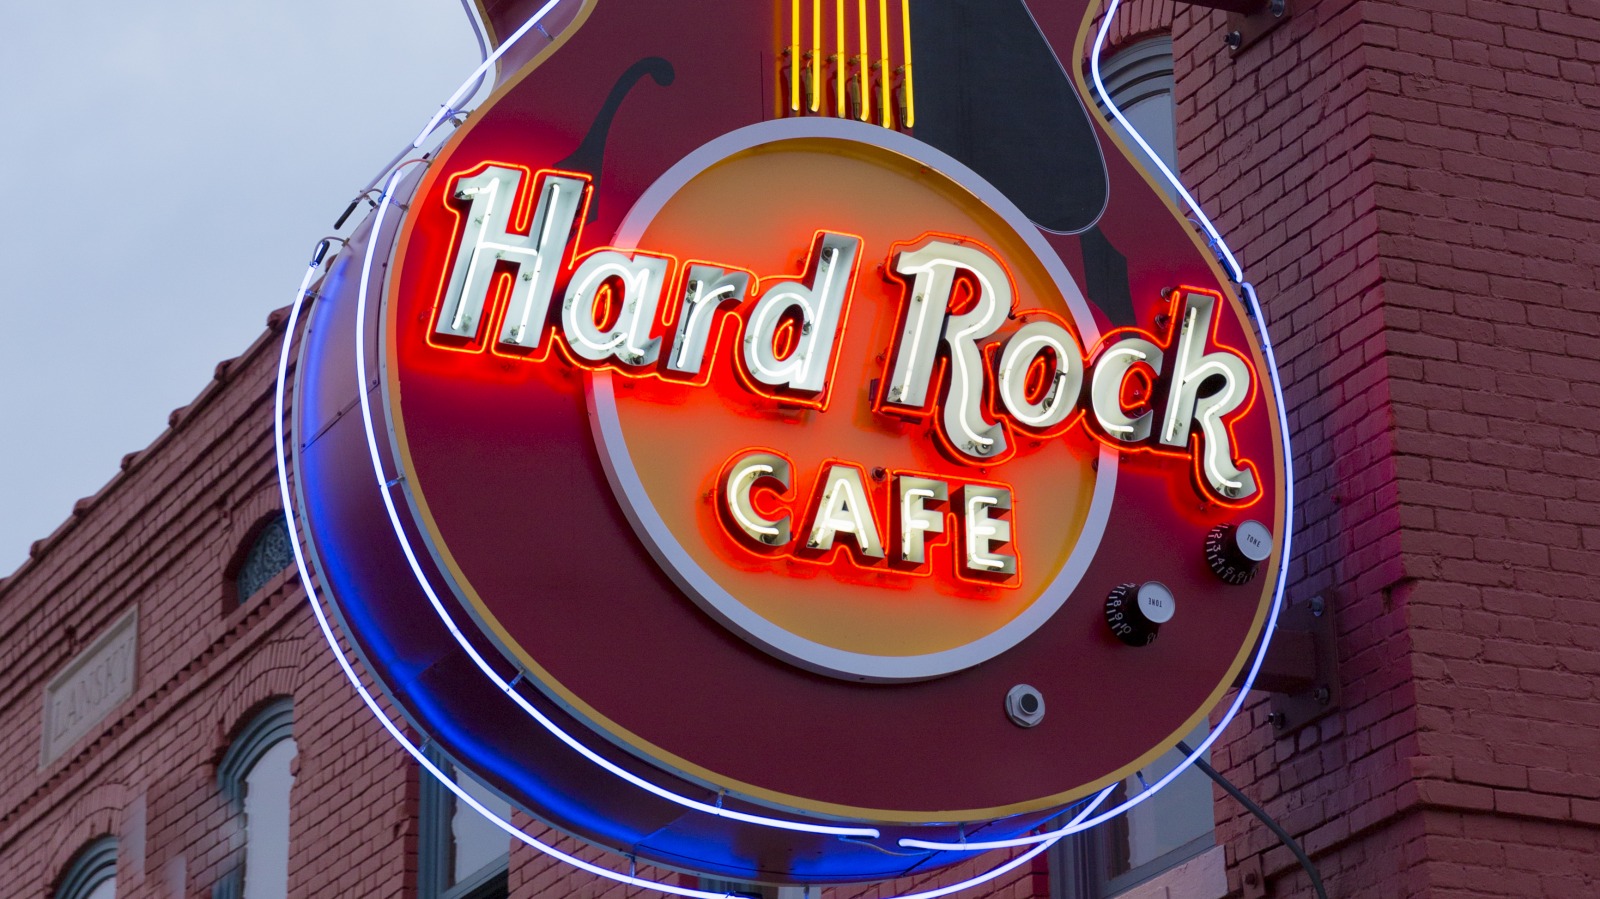 History of Hard Rock: An introduction to the brand